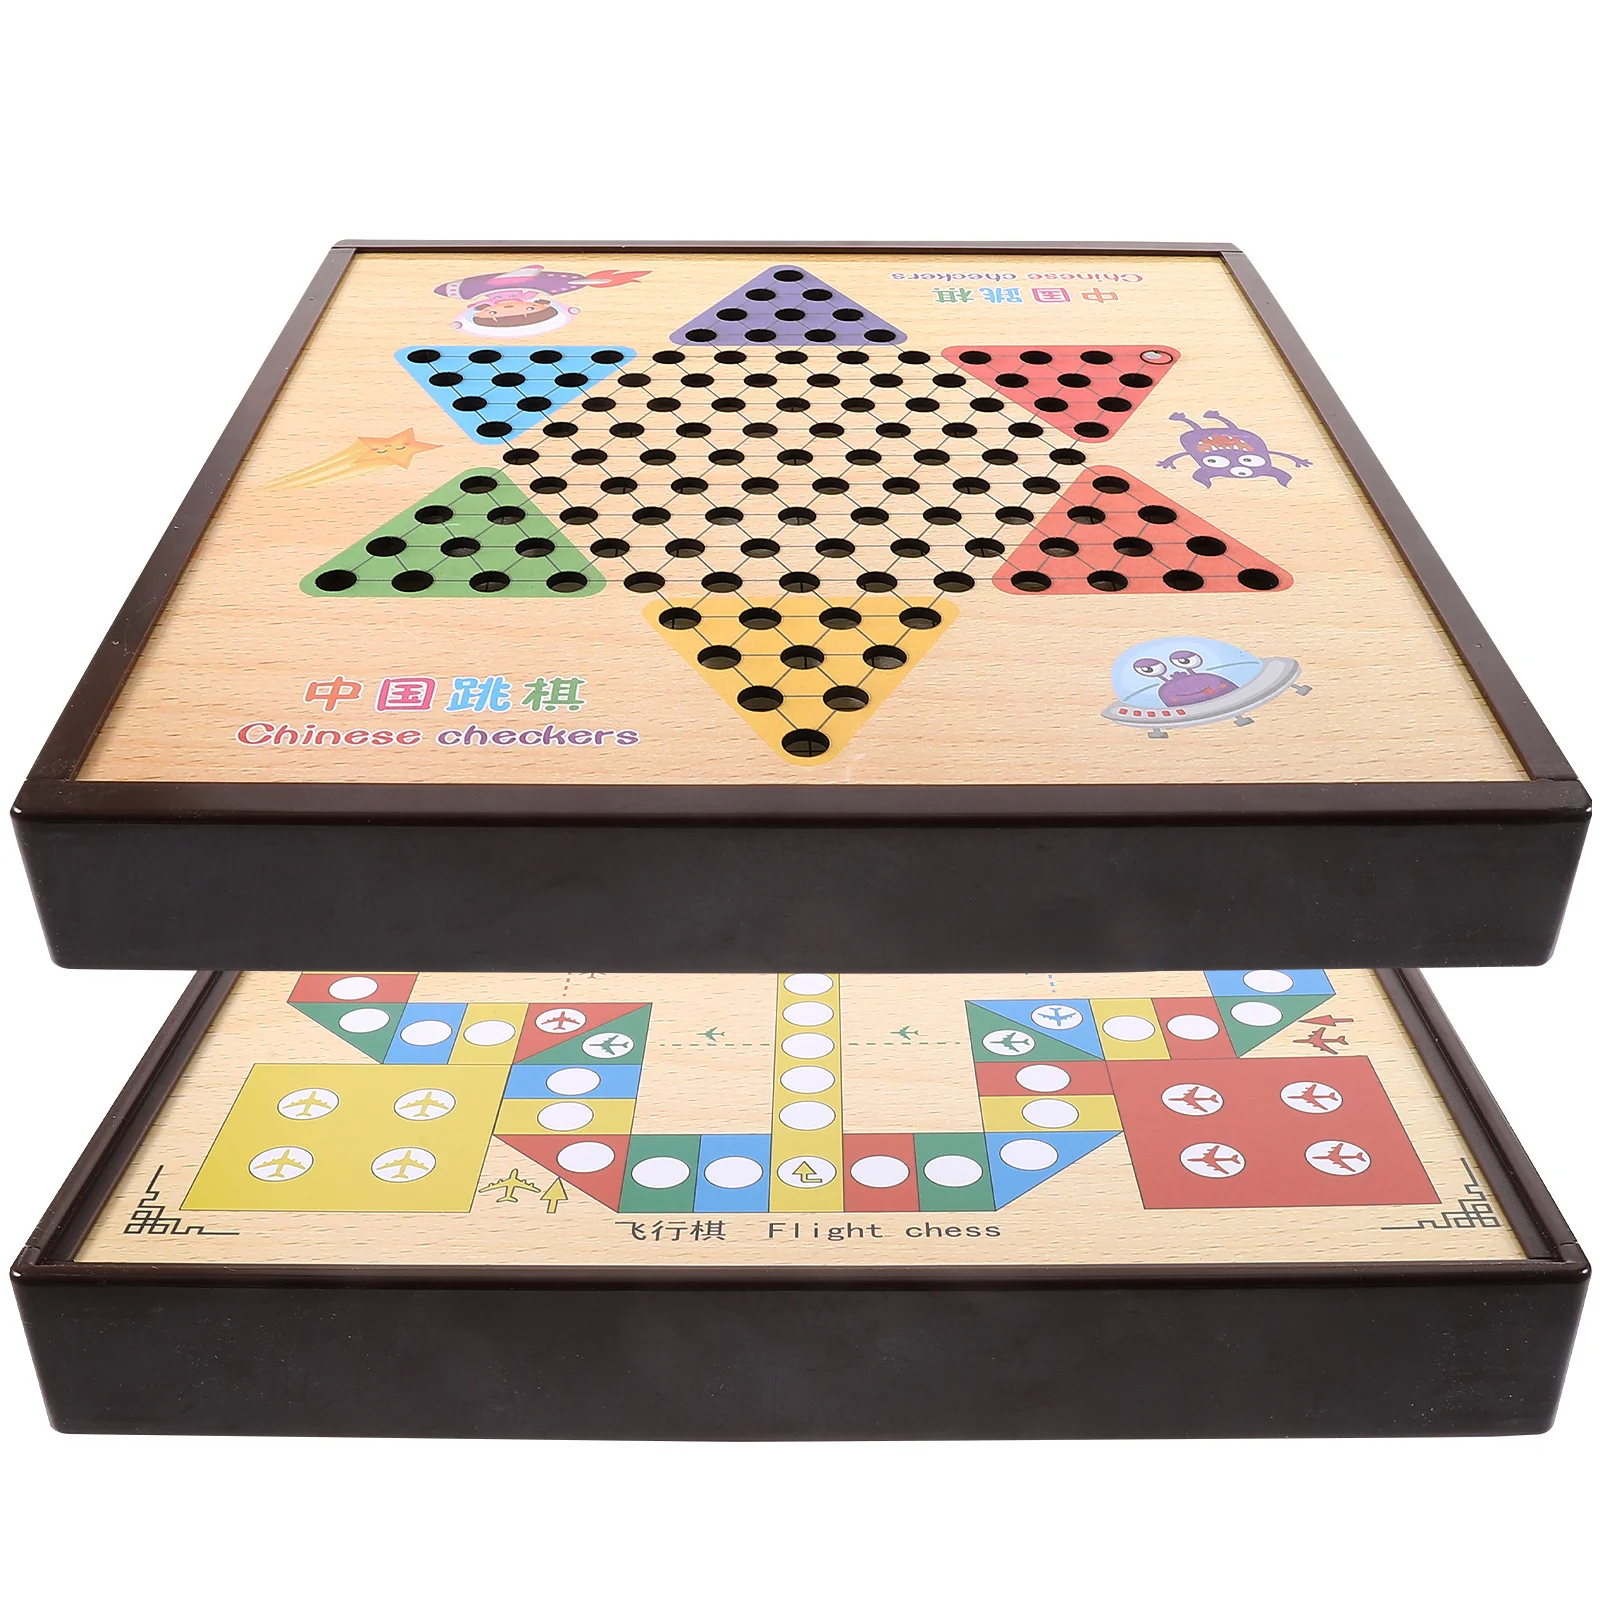 All-in-one Checkers Convenient Chess Wooden Playset Game Board Kids Adults Small Table Travel